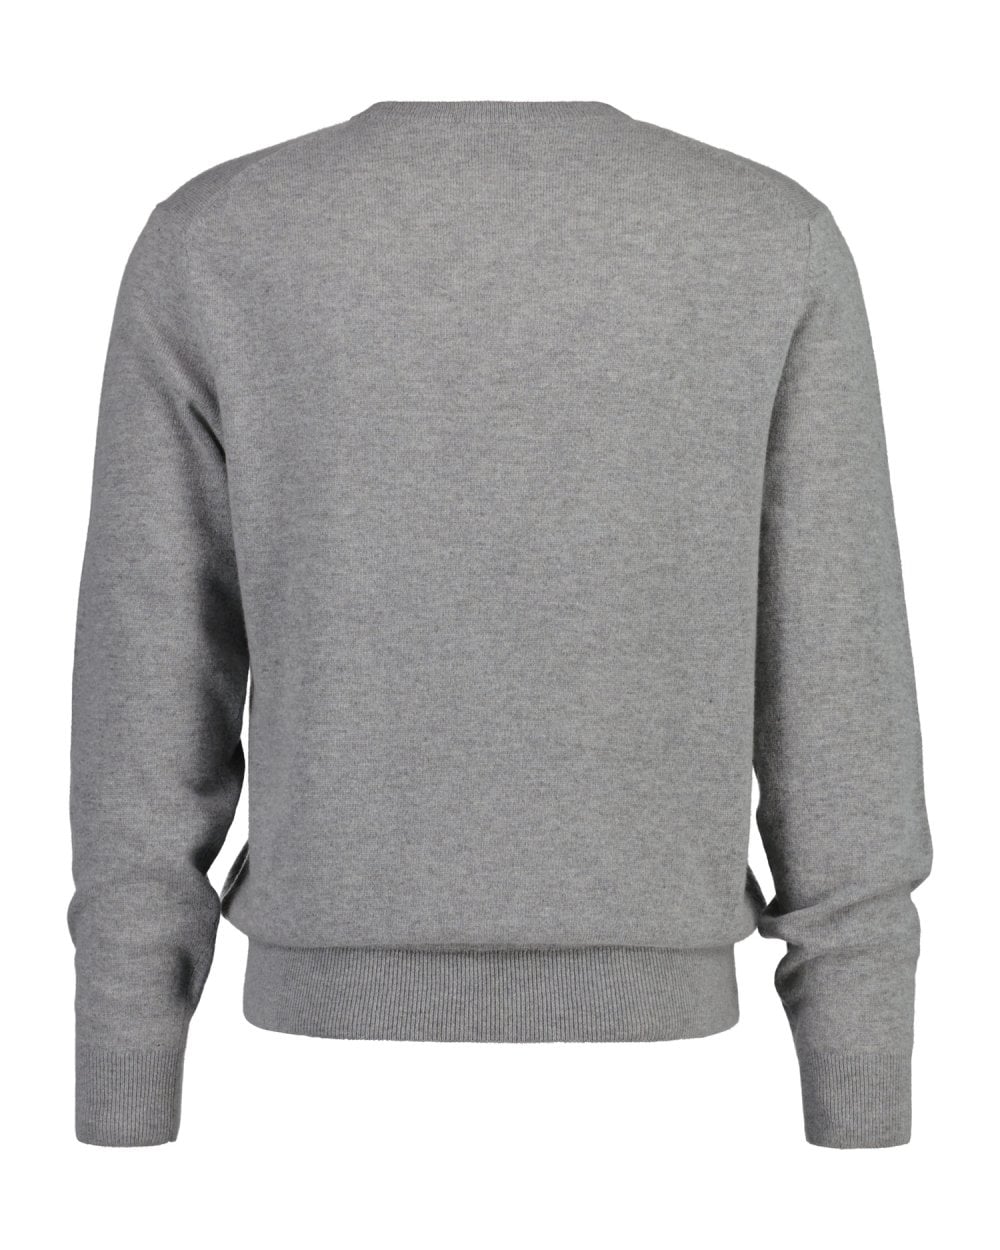 Extra Fine Lambswool V-Neck Sweater